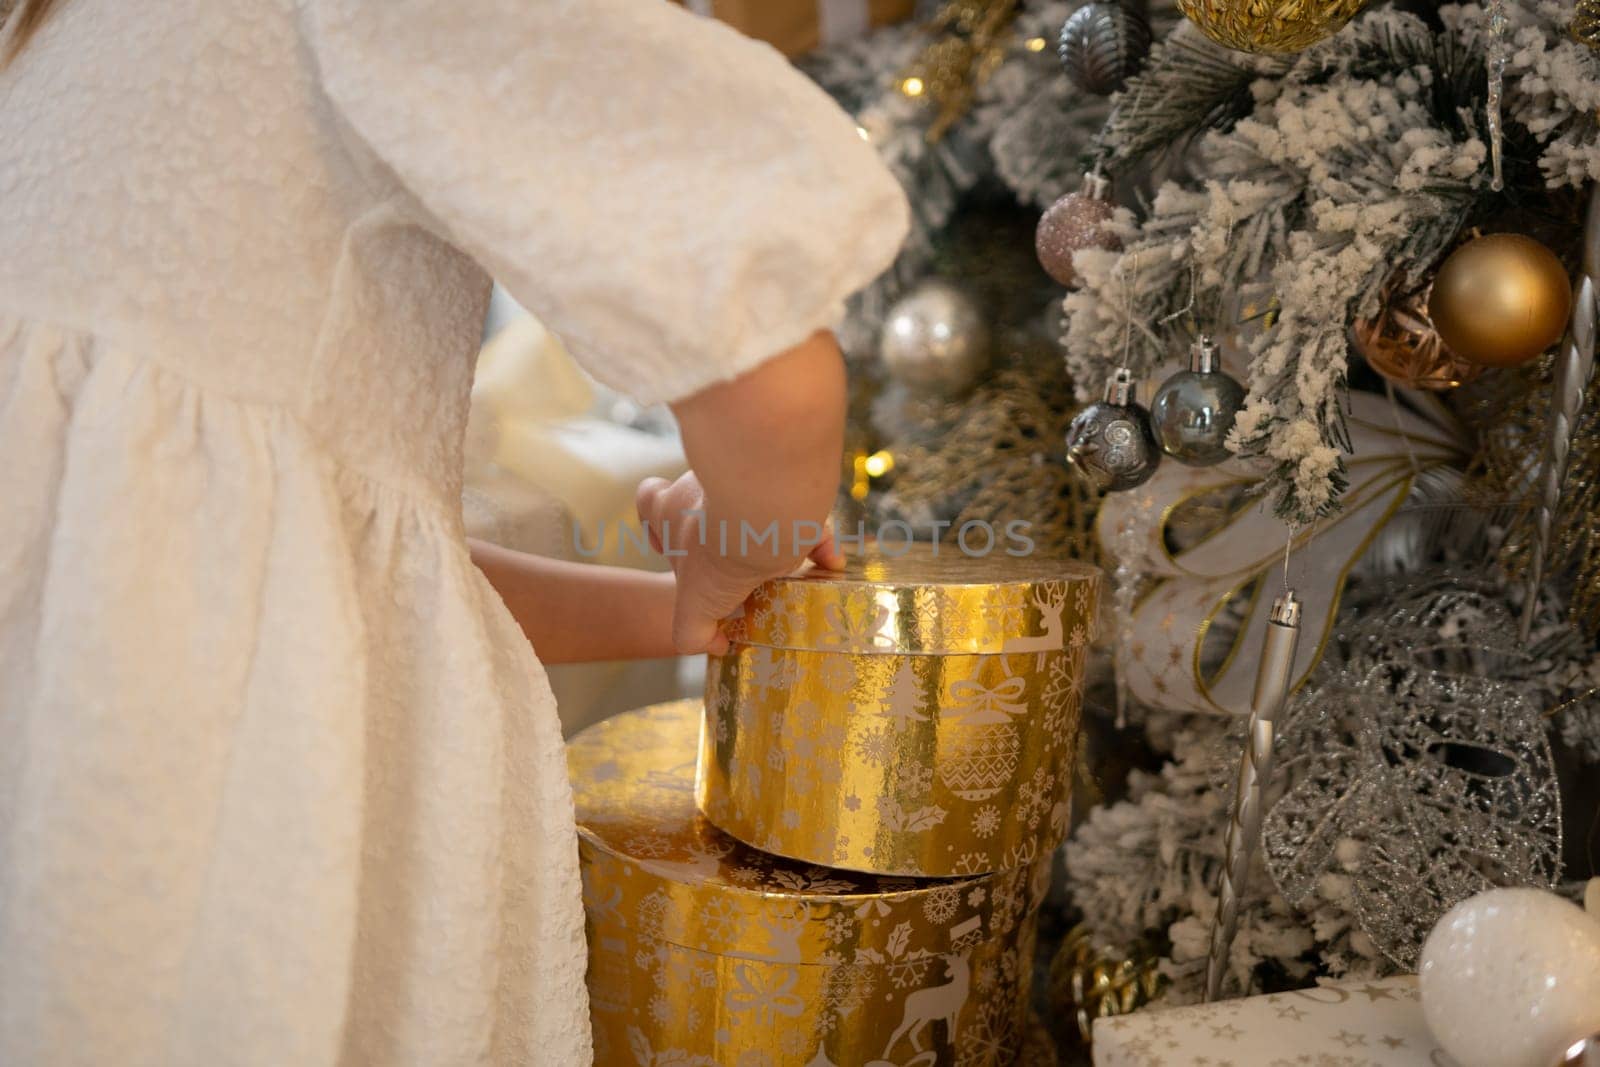 A woman is opening a gold box with a silver ball inside. The box is decorated with gold and silver ornaments, and the woman is wearing a white dress. The scene is set in a room with a Christmas tree